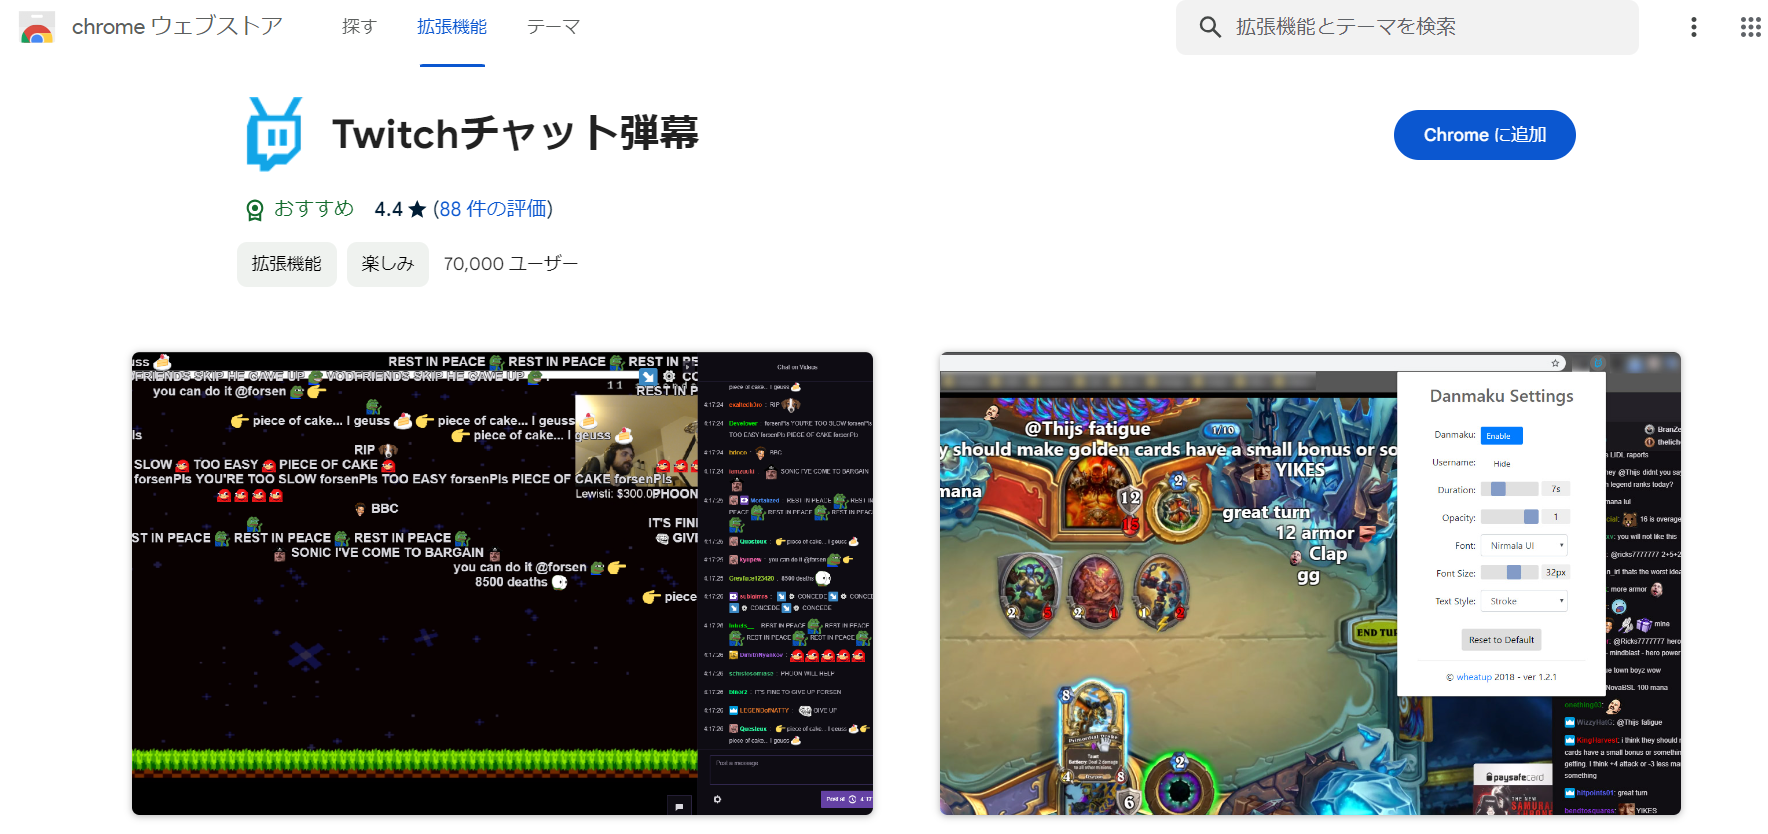 12.Twitchチャット弾幕